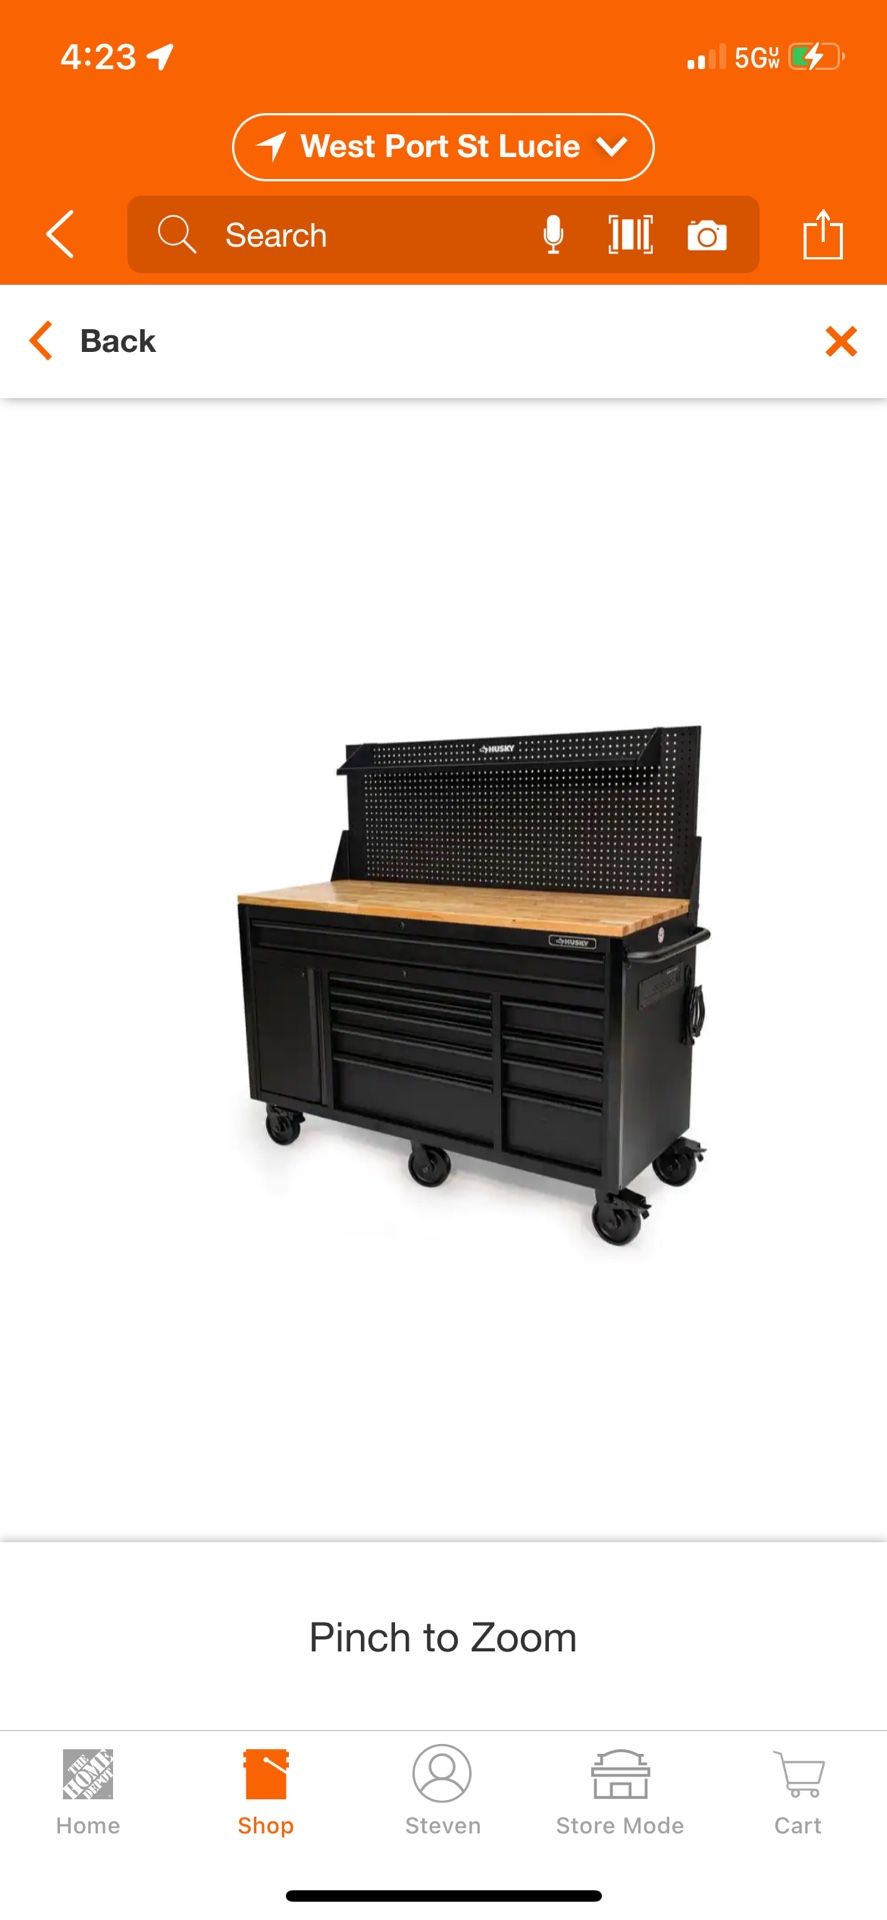 61 in. W x 26 in. D Heavy Duty 10-Drawer 1-Door Mobile Workbench with Hardwood Top, Pegboard and Shelf in Matte Black